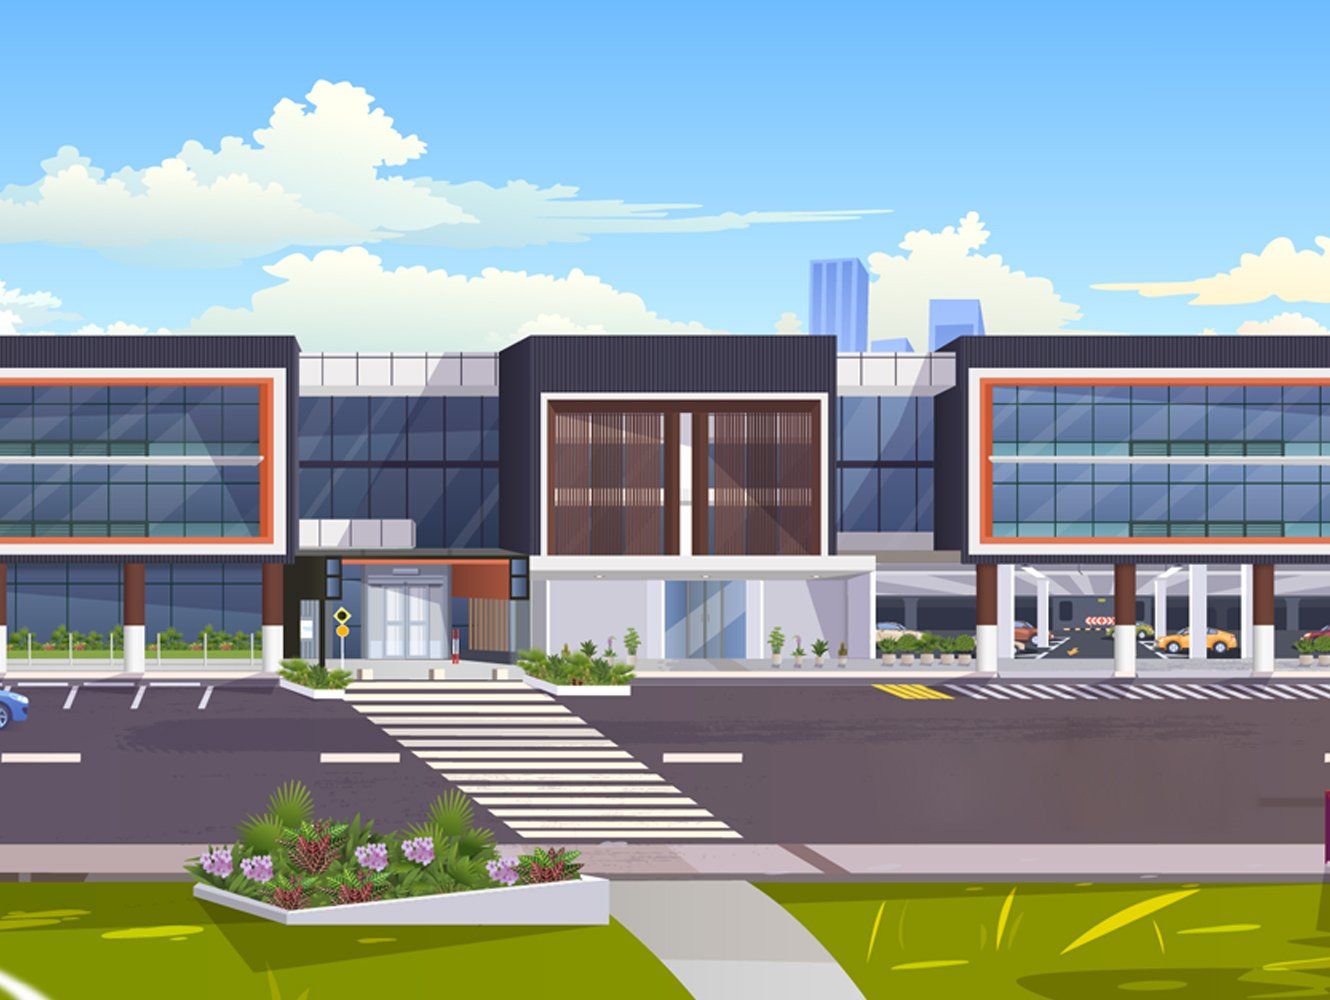 Stathprine office illustration showing a large building, road with c